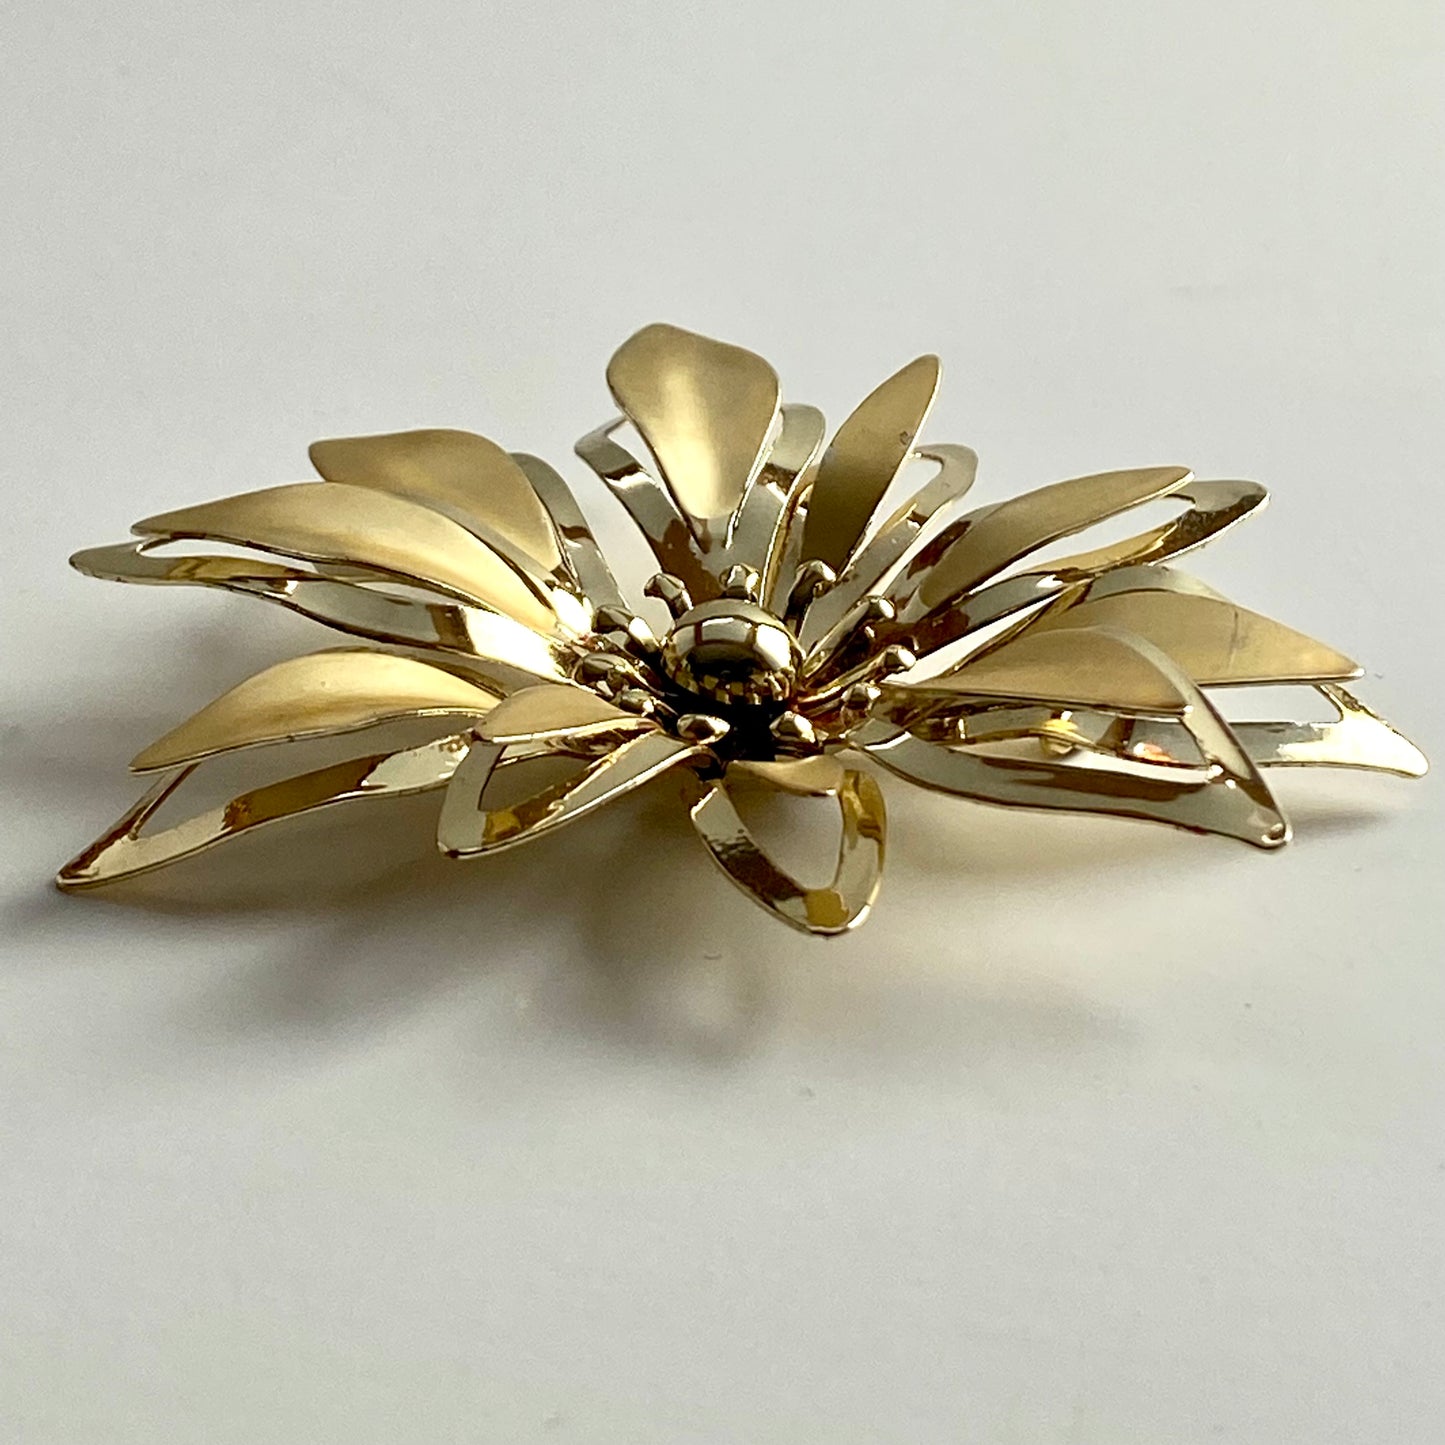 Late 60s/ Early 70s Poinsettia Brooch